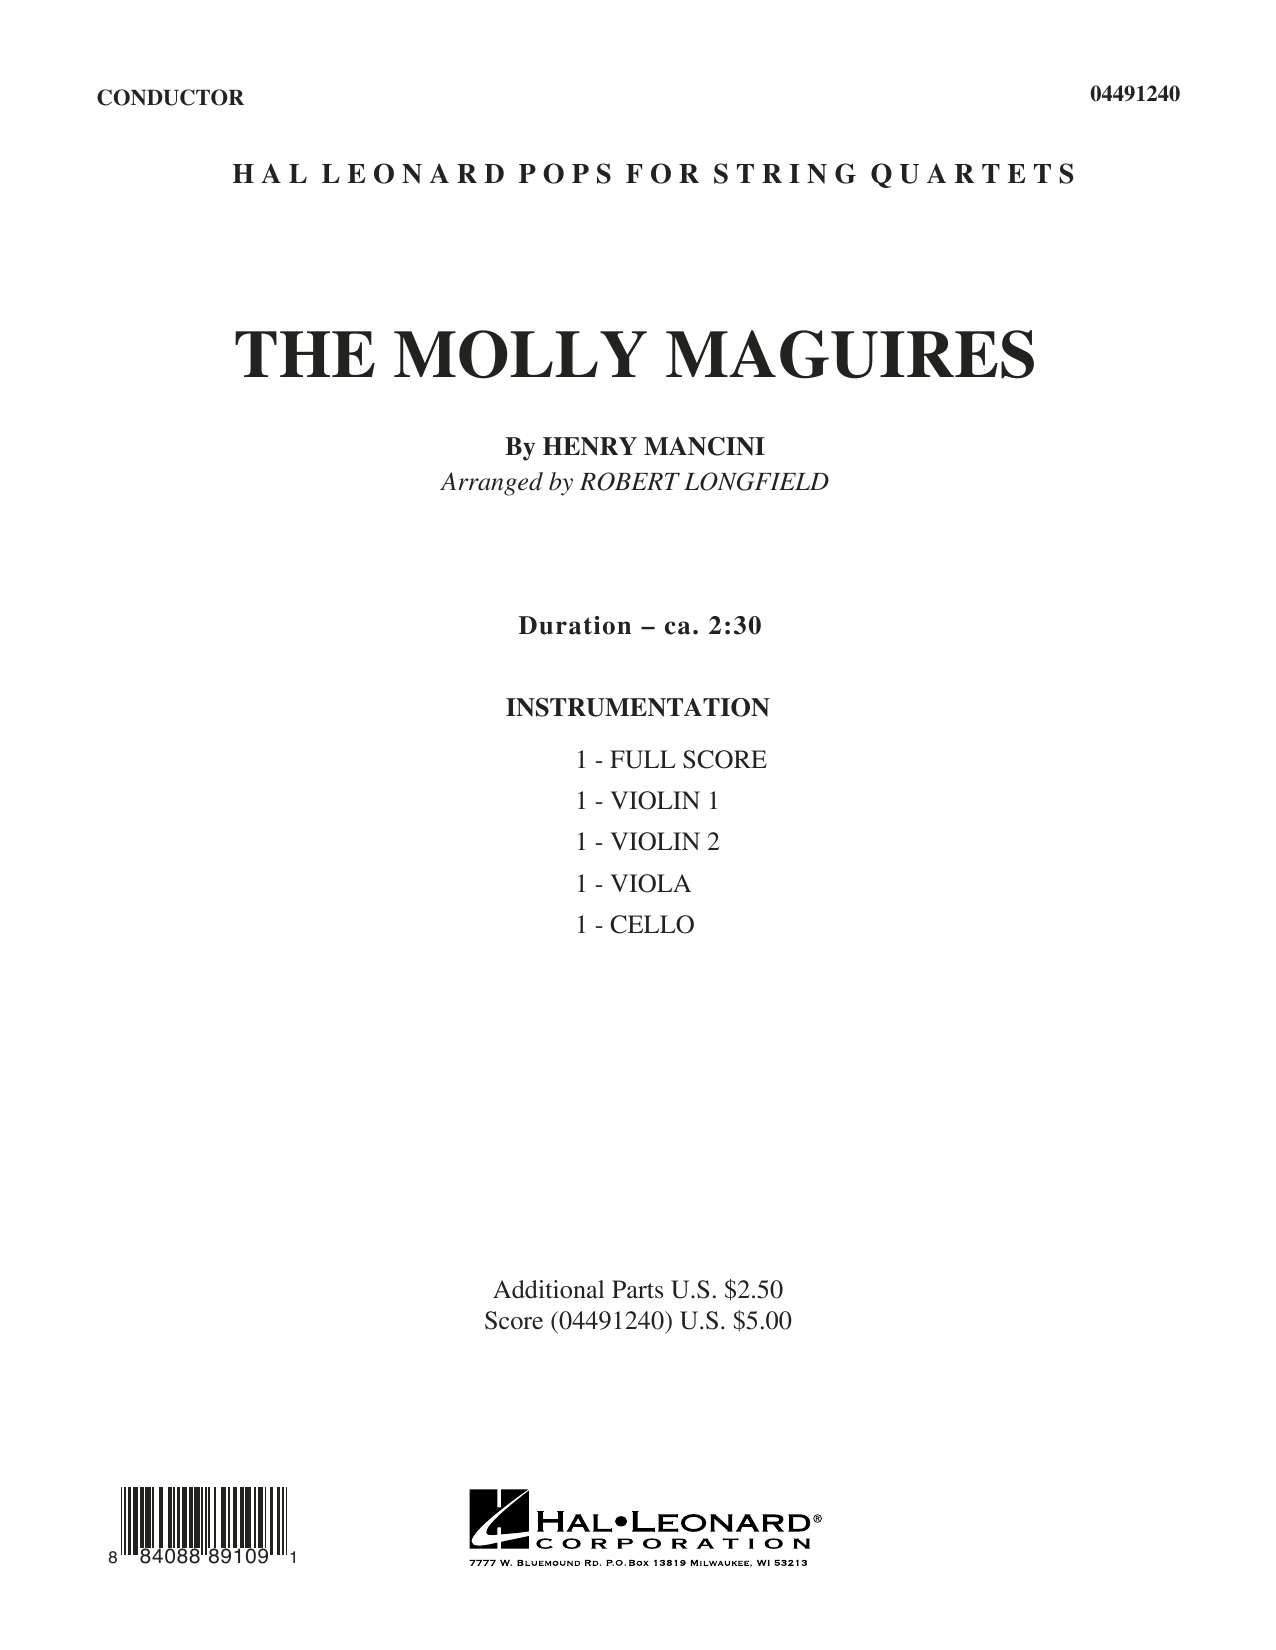 Download Robert Longfield The Molly Maguires - Conductor Score (F Sheet Music